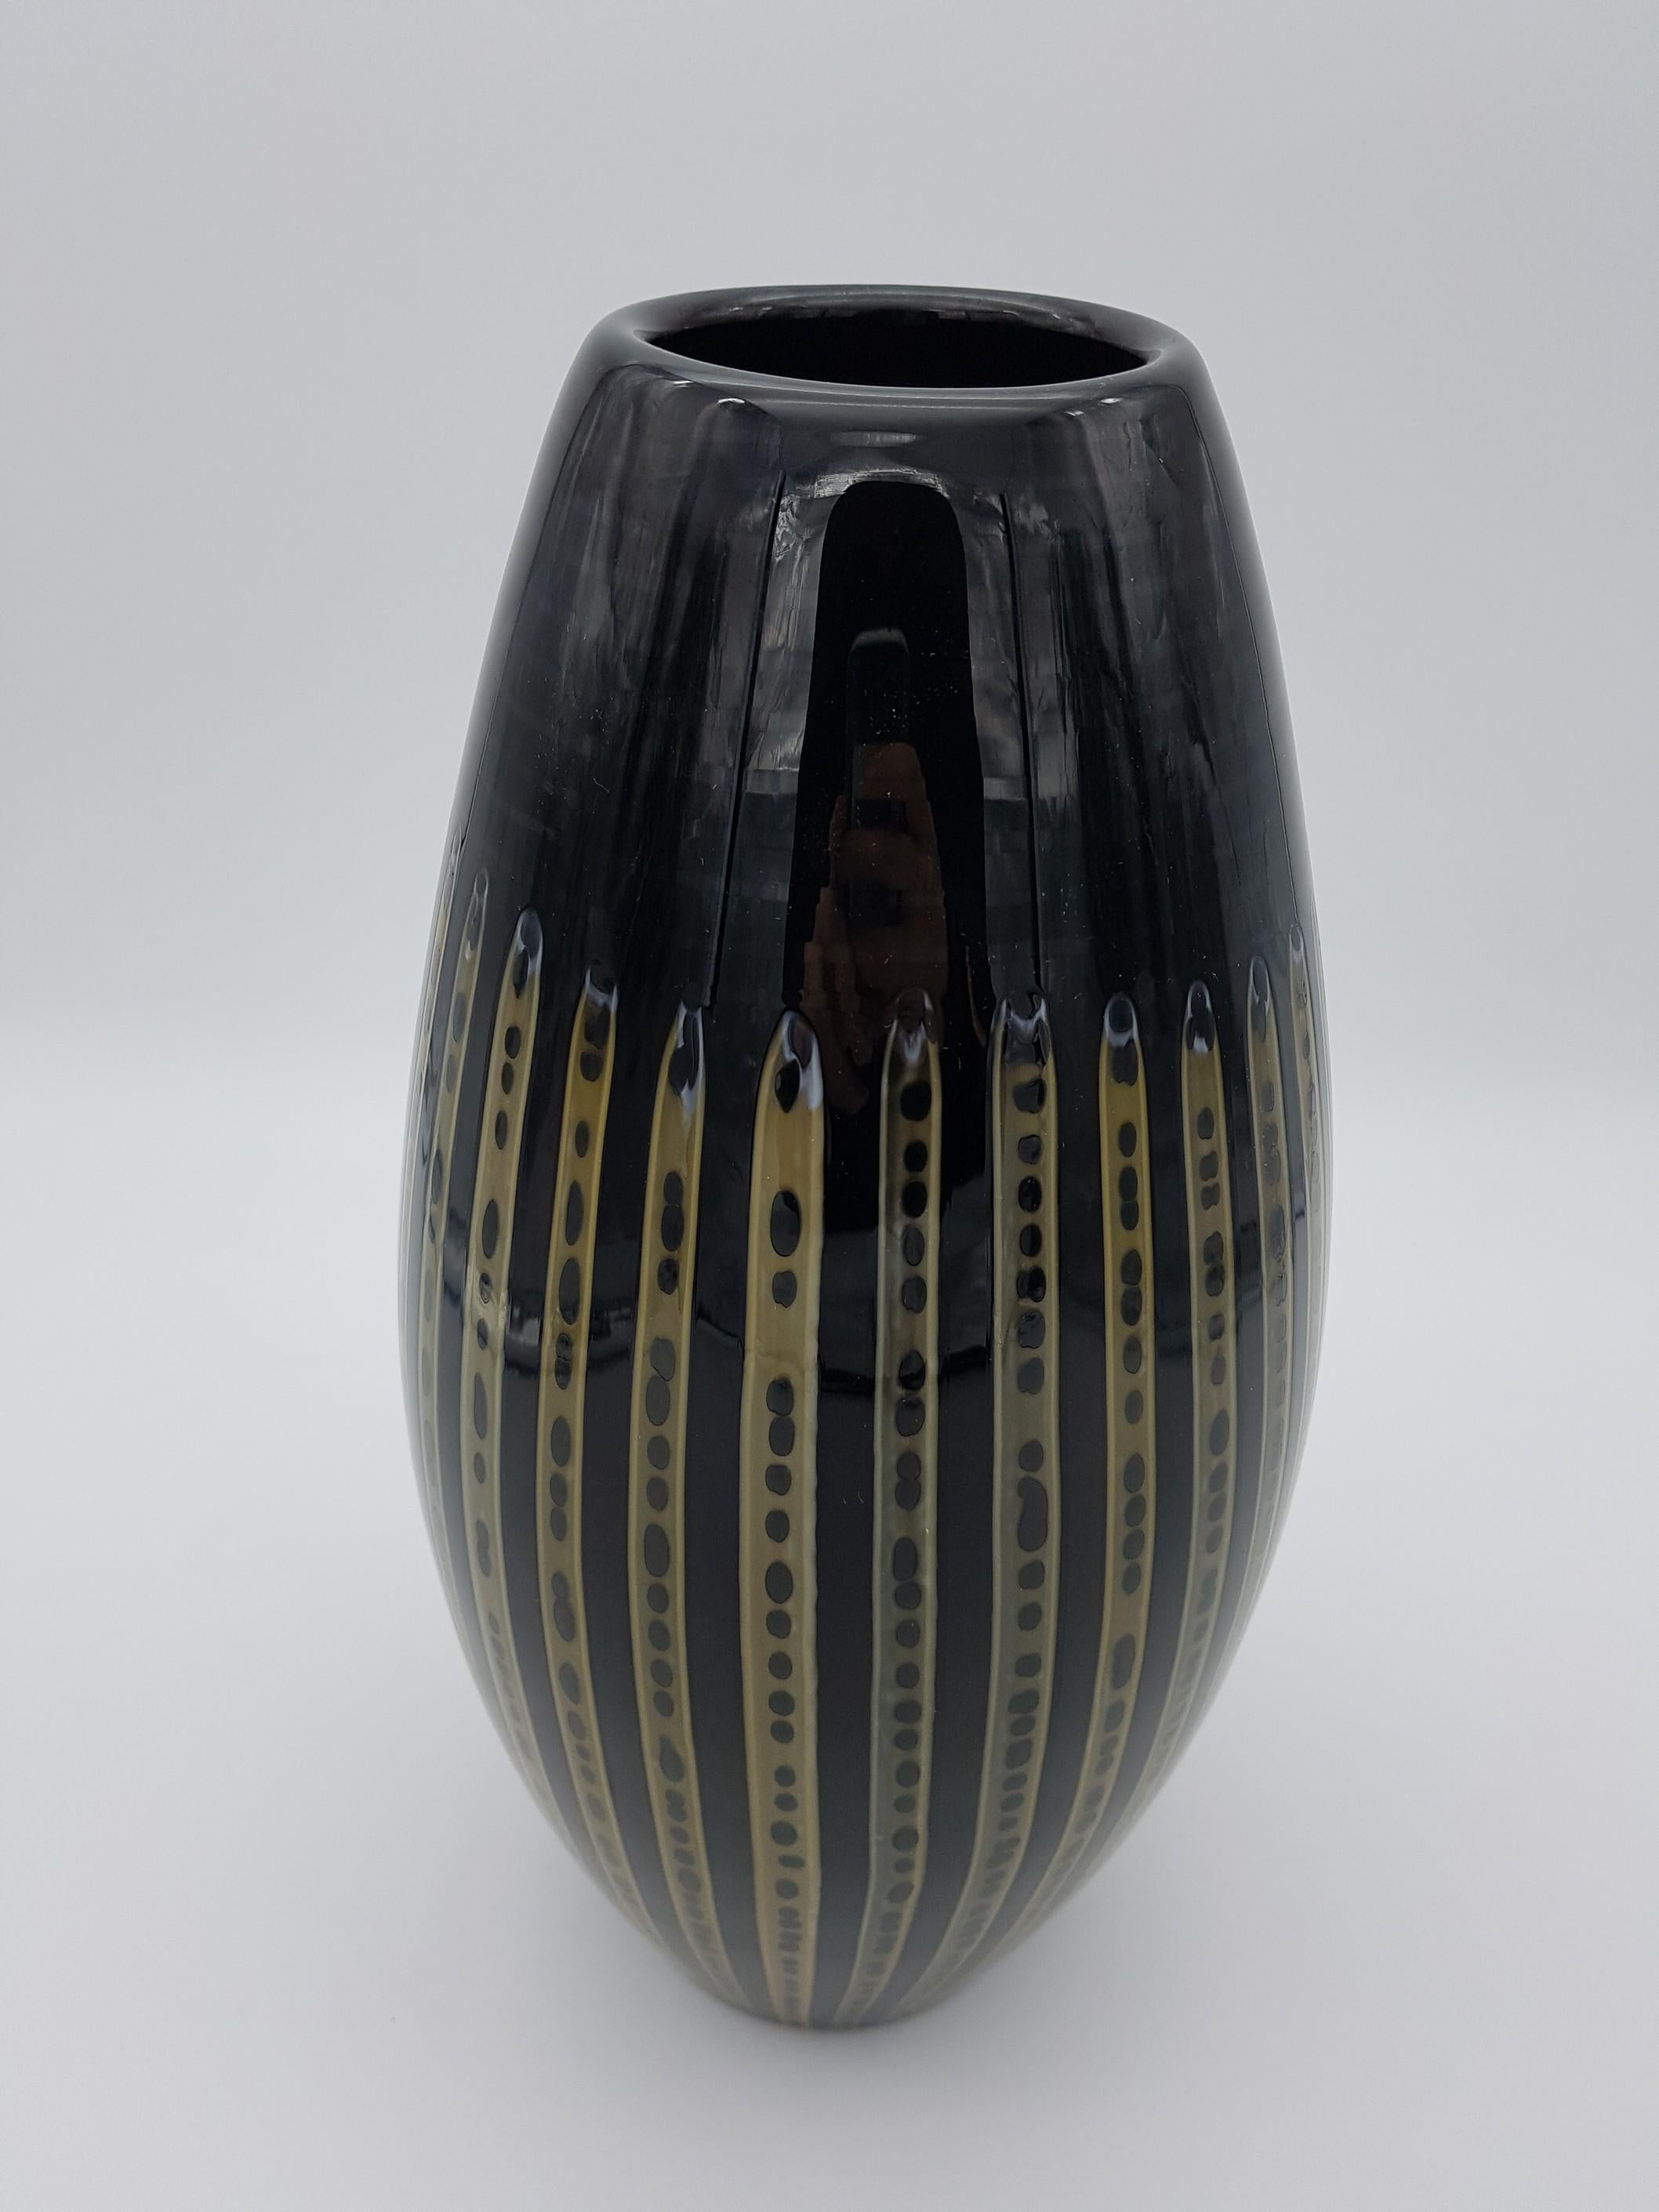 Modern and elegant Murano glass vase, made in the late 1990s by the historical glass-factory Gino Cenedese e Figlio. This beautiful vase is all black color, with vertical yellow glass canes that are the distinctive feature of this piece. The yellow